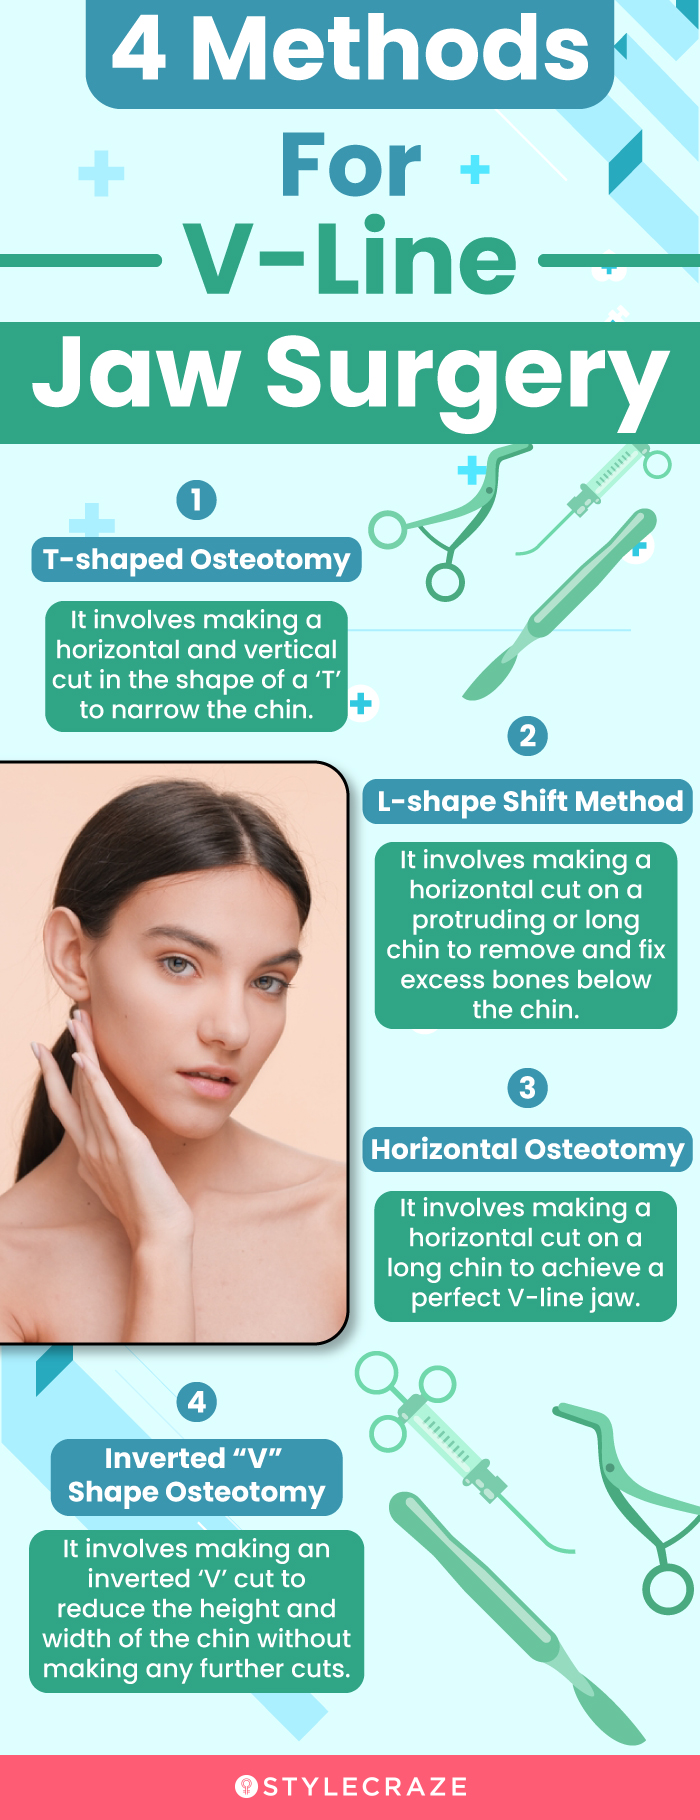 4 methods for vline jaw surgery (infographic)